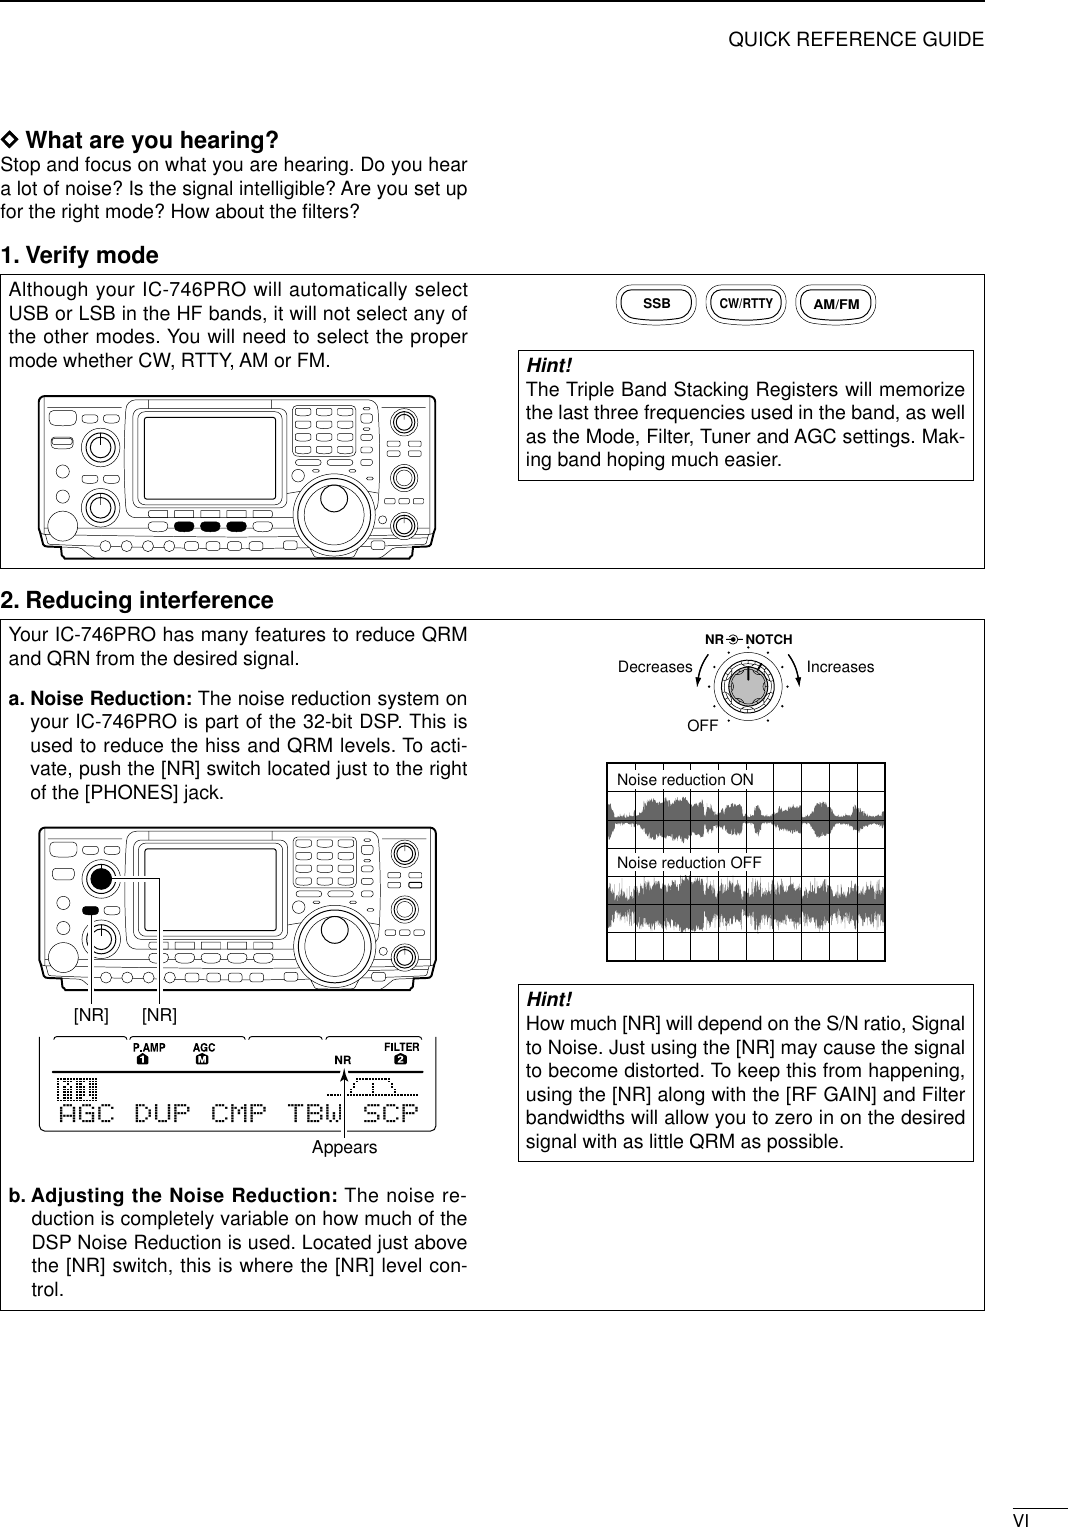 VIQUICK REFERENCE GUIDEDWhat are you hearing? Stop and focus on what you are hearing. Do you heara lot of noise? Is the signal intelligible? Are you set upfor the right mode? How about the ﬁlters?1. Verify modeYour IC-746PRO has many features to reduce QRMand QRN from the desired signal. a. Noise Reduction: The noise reduction system onyour IC-746PRO is part of the 32-bit DSP. This isused to reduce the hiss and QRM levels. To acti-vate, push the [NR] switch located just to the rightof the [PHONES] jack.b. Adjusting the Noise Reduction: The noise re-duction is completely variable on how much of theDSP Noise Reduction is used. Located just abovethe [NR] switch, this is where the [NR] level con-trol. Hint! How much [NR] will depend on the S/N ratio, Signalto Noise. Just using the [NR] may cause the signalto become distorted. To keep this from happening,using the [NR] along with the [RF GAIN] and Filterbandwidths will allow you to zero in on the desiredsignal with as little QRM as possible.Noise reduction ONNoise reduction OFFNR NOTCHOFFDecreases IncreasesAGC DUP CMP TBW SCP[NR] [NR]AppearsAlthough your IC-746PRO will automatically selectUSB or LSB in the HF bands, it will not select any ofthe other modes. You will need to select the propermode whether CW, RTTY, AM or FM.Hint! The Triple Band Stacking Registers will memorizethe last three frequencies used in the band, as wellas the Mode, Filter, Tuner and AGC settings. Mak-ing band hoping much easier.SSBCW/RTTYAM/FM2. Reducing interference